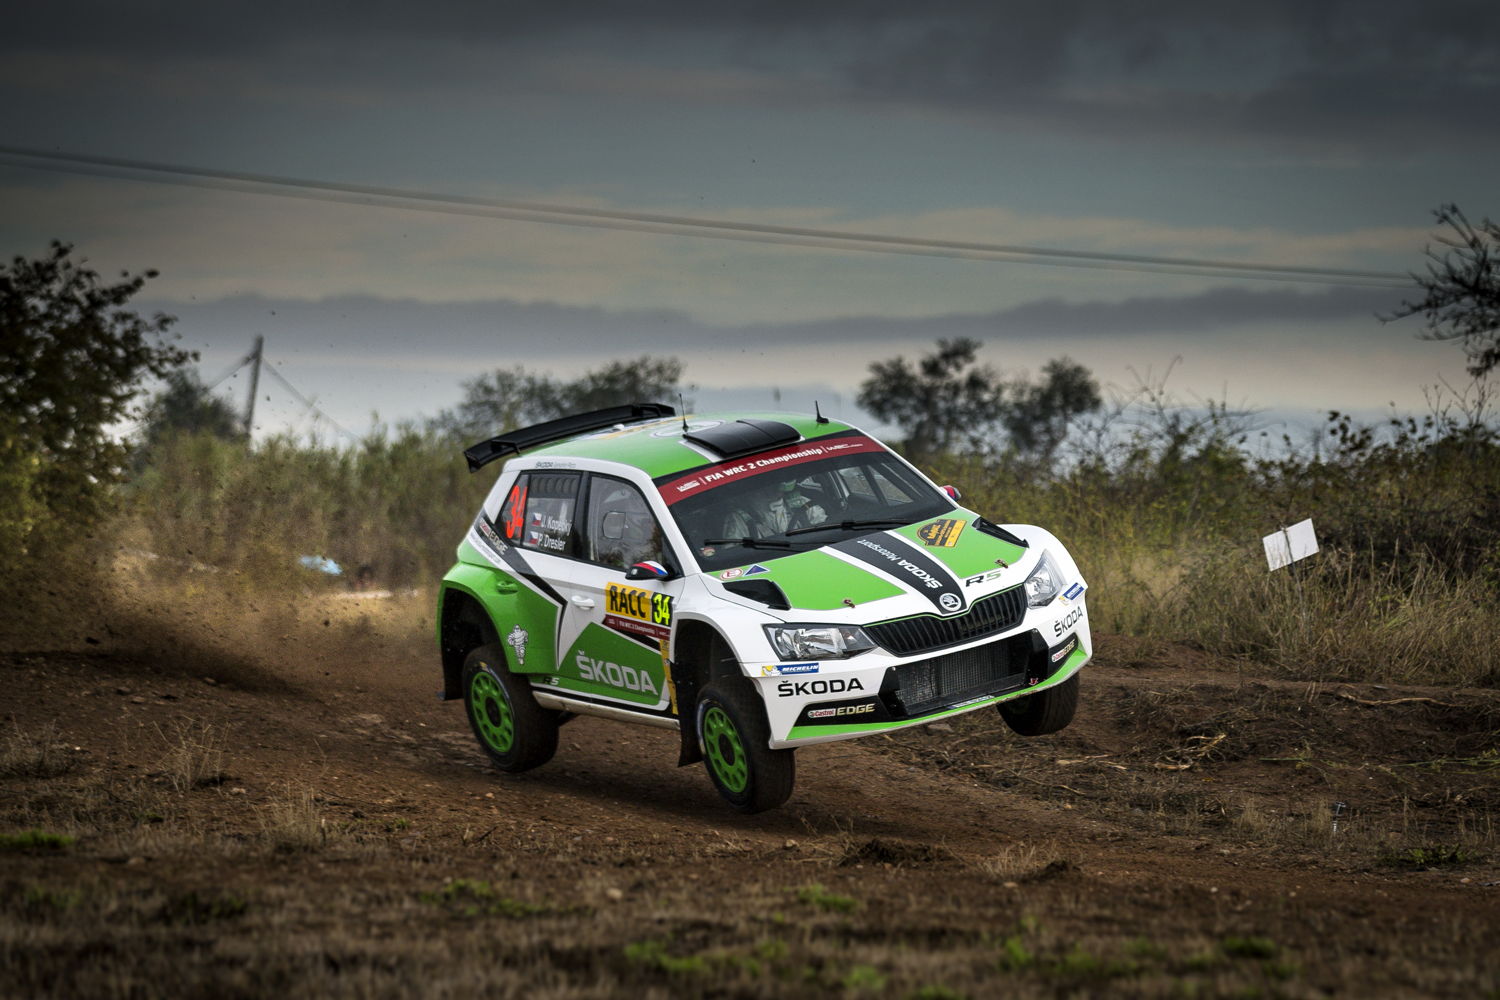 Jan Kopecký (CZ) and Pavel Dresler (CZ) were convincing on the first two days with spectacular jumps and three stage best times in their ŠKODA FABIA R5.